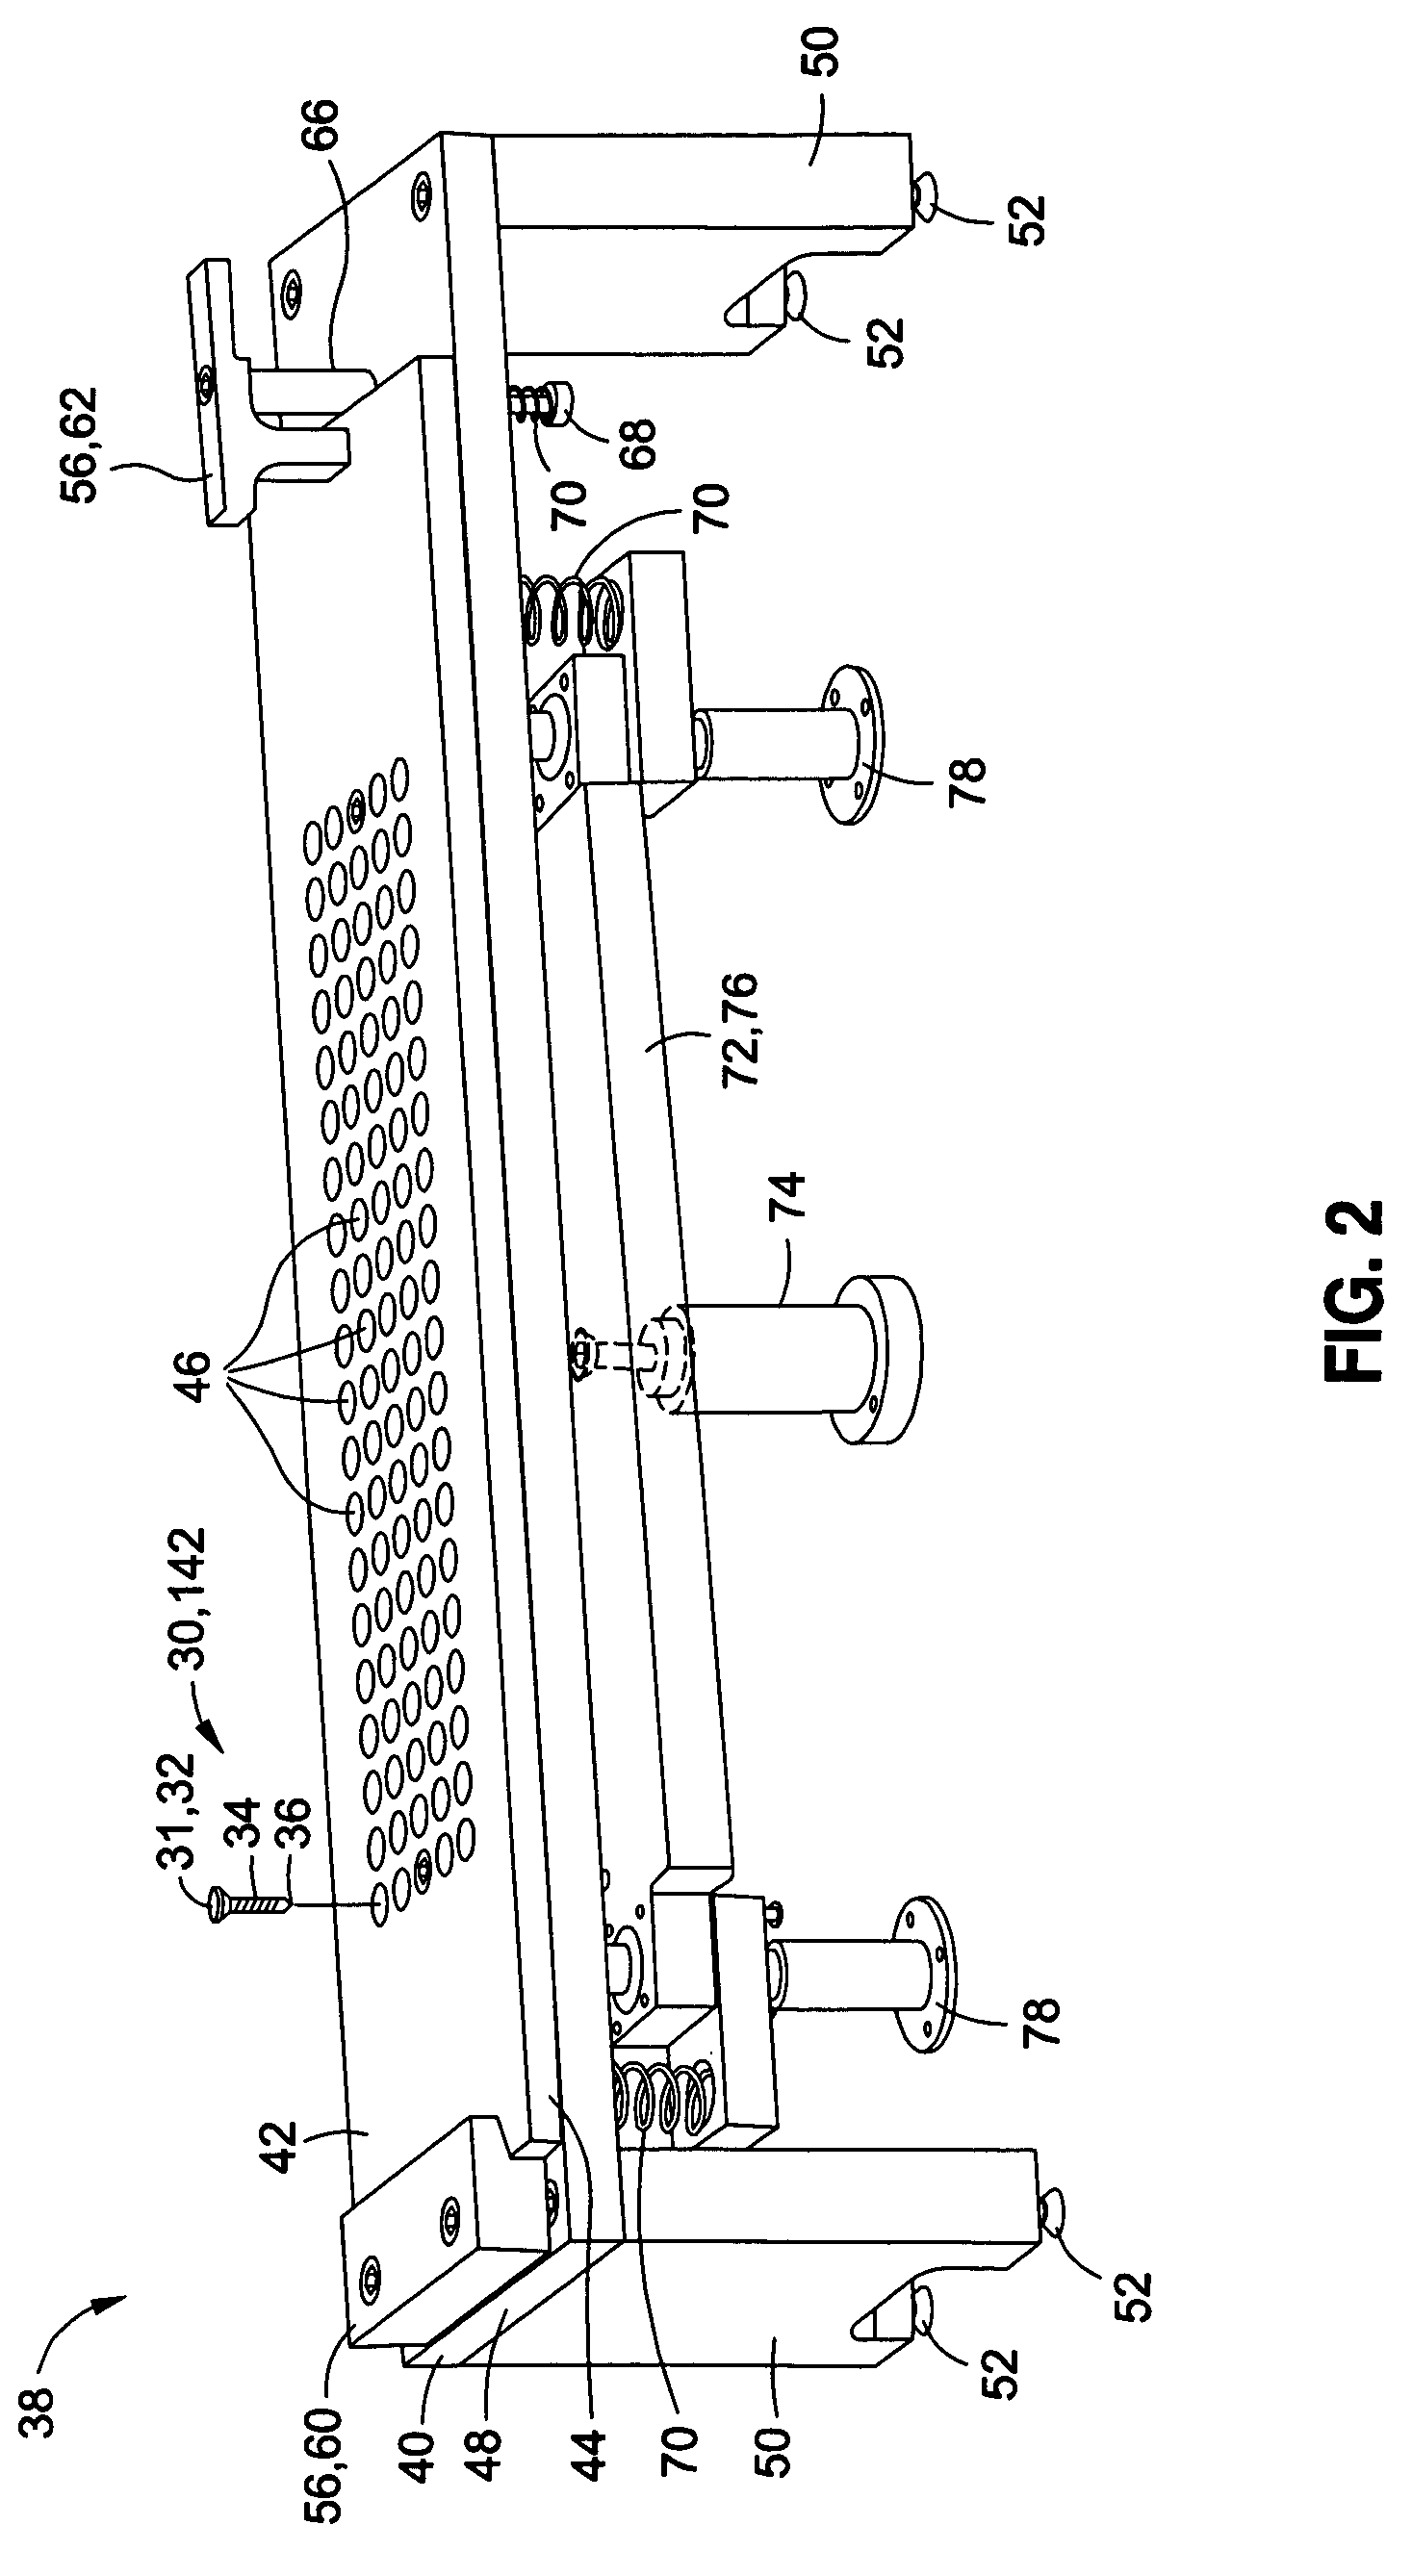 Controlled environment chamber for applying a coating material to a surface of a member